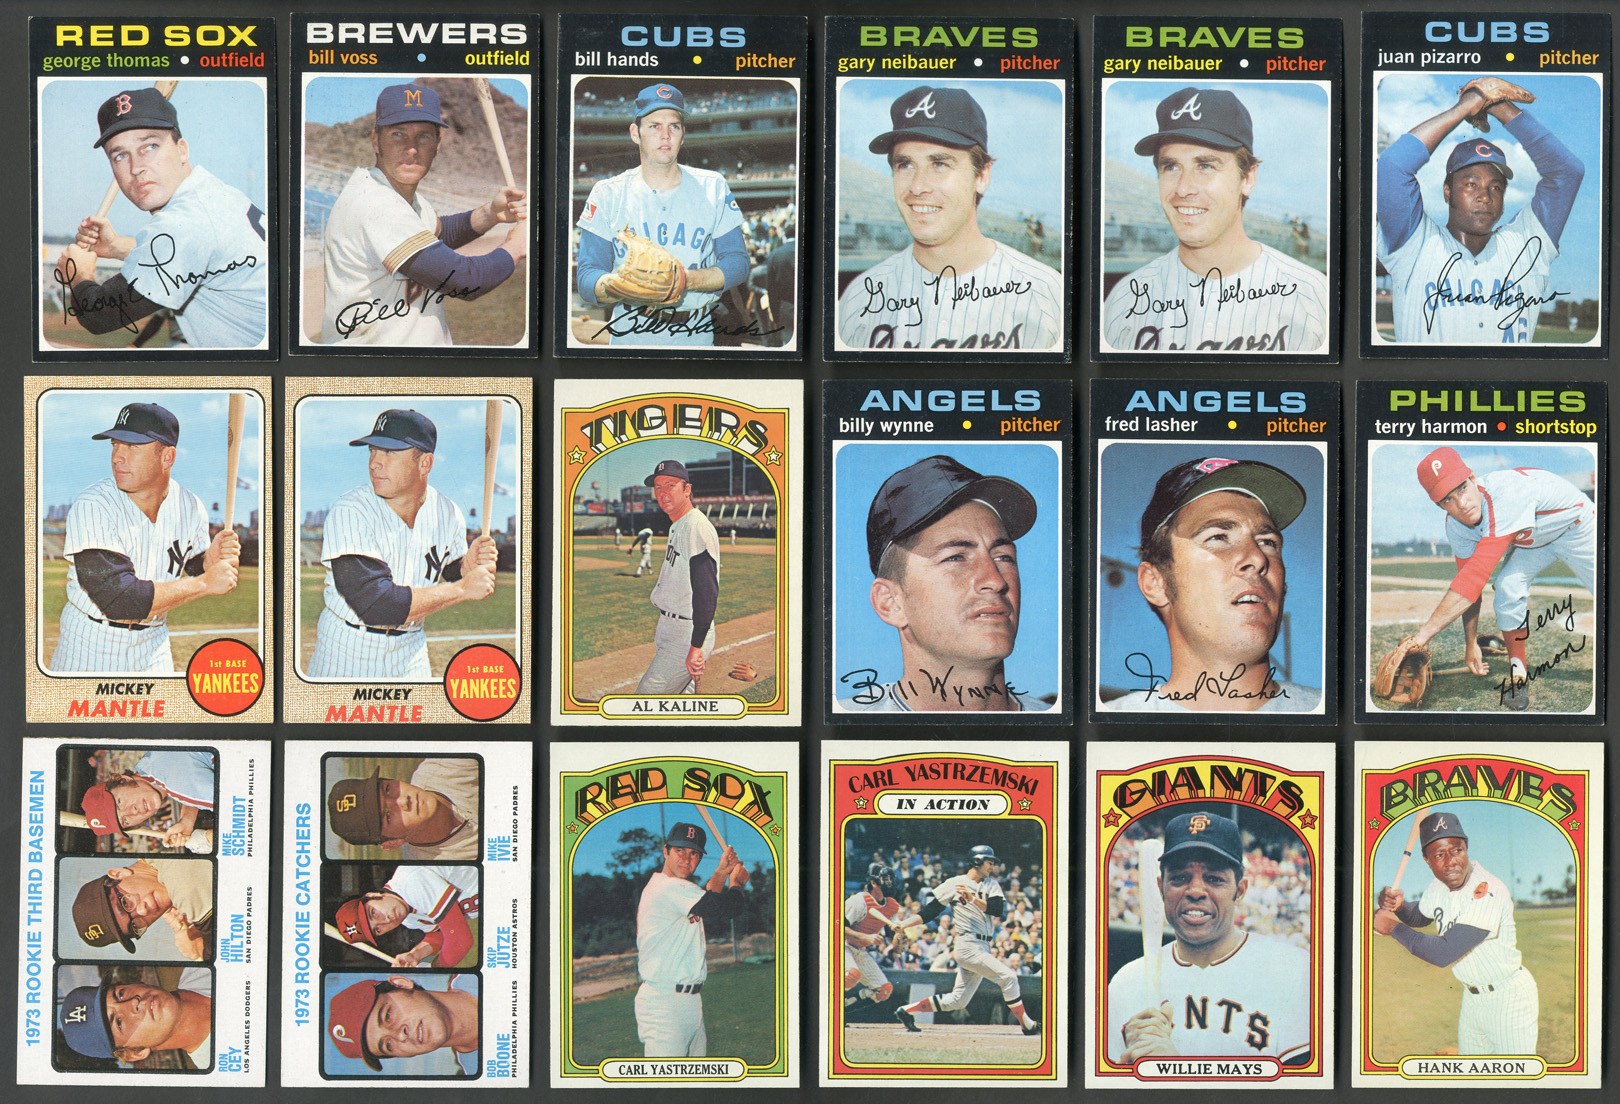 Baseball and Trading Cards - 1966-1975 Topps HIGH GRADE Baseball Card Collection (6000+ Cards with Major Stars!)